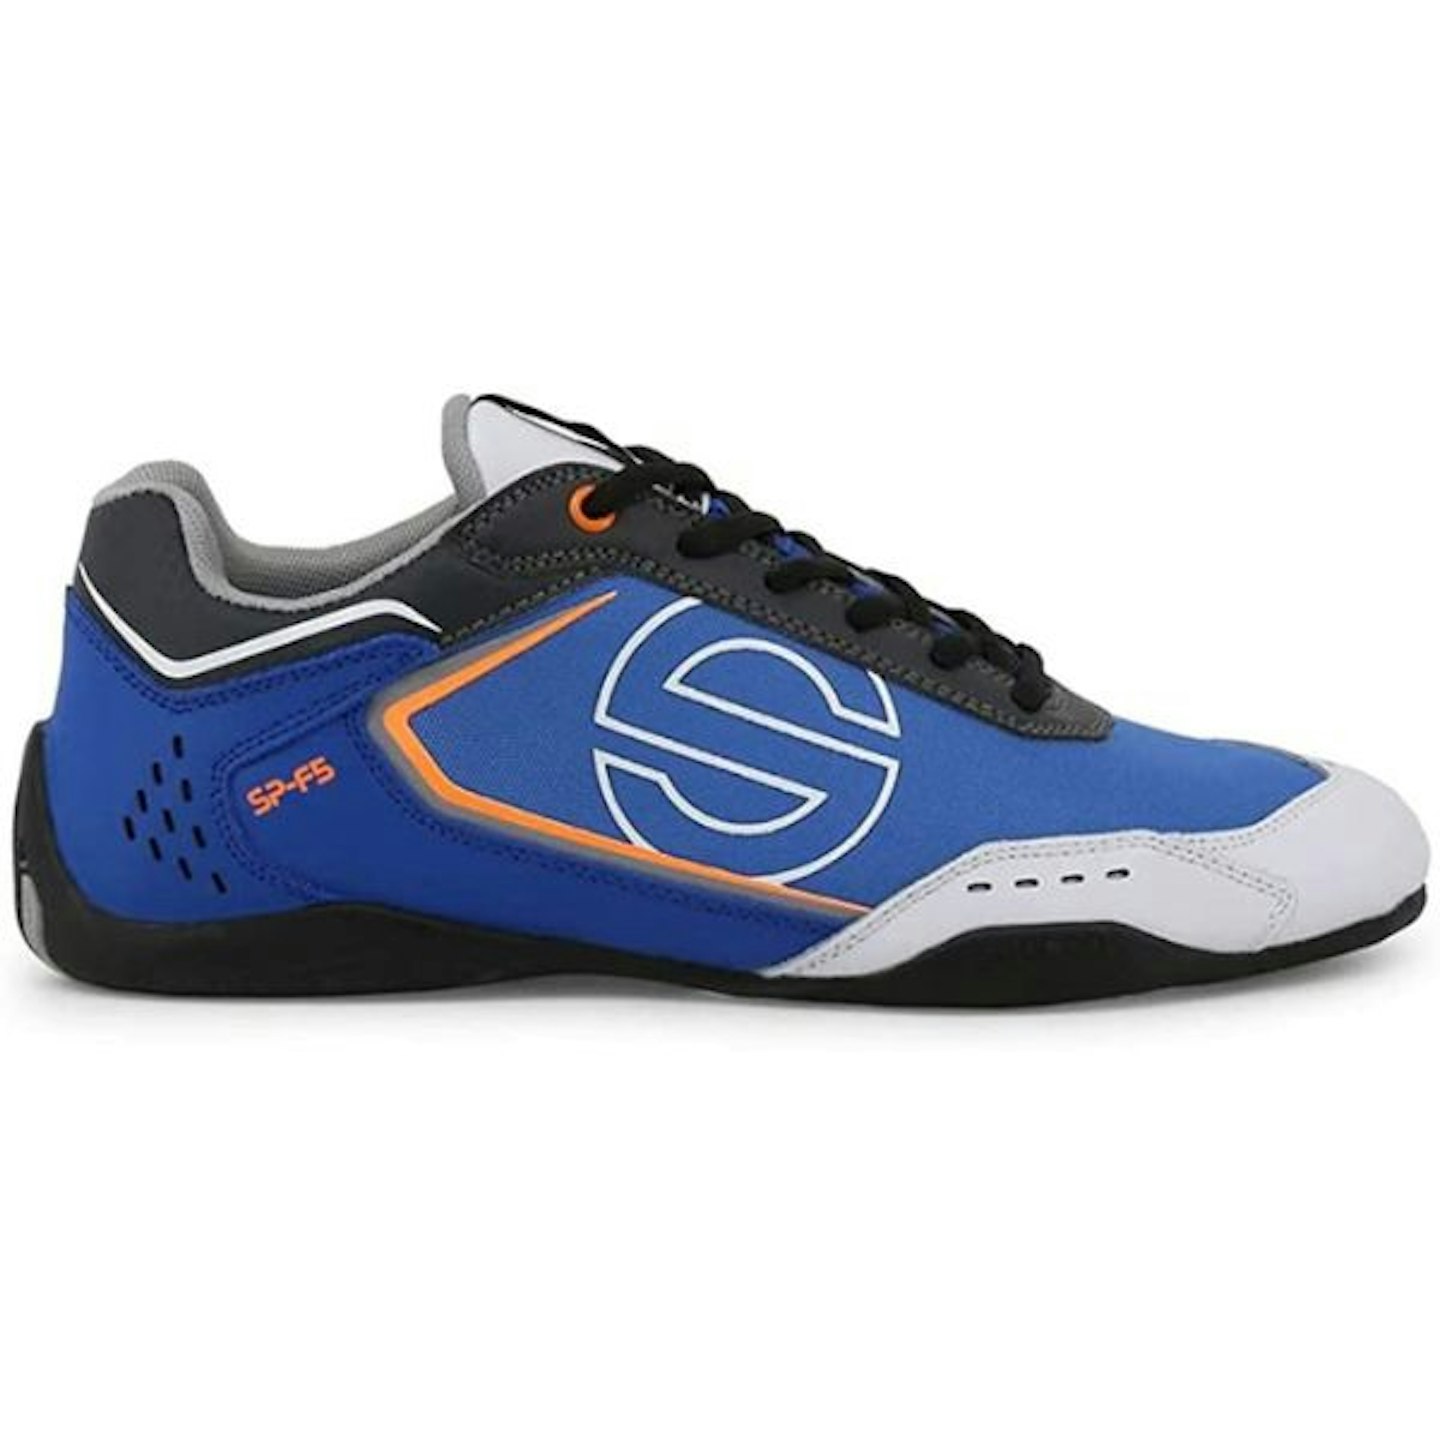 Sparco SP-F5